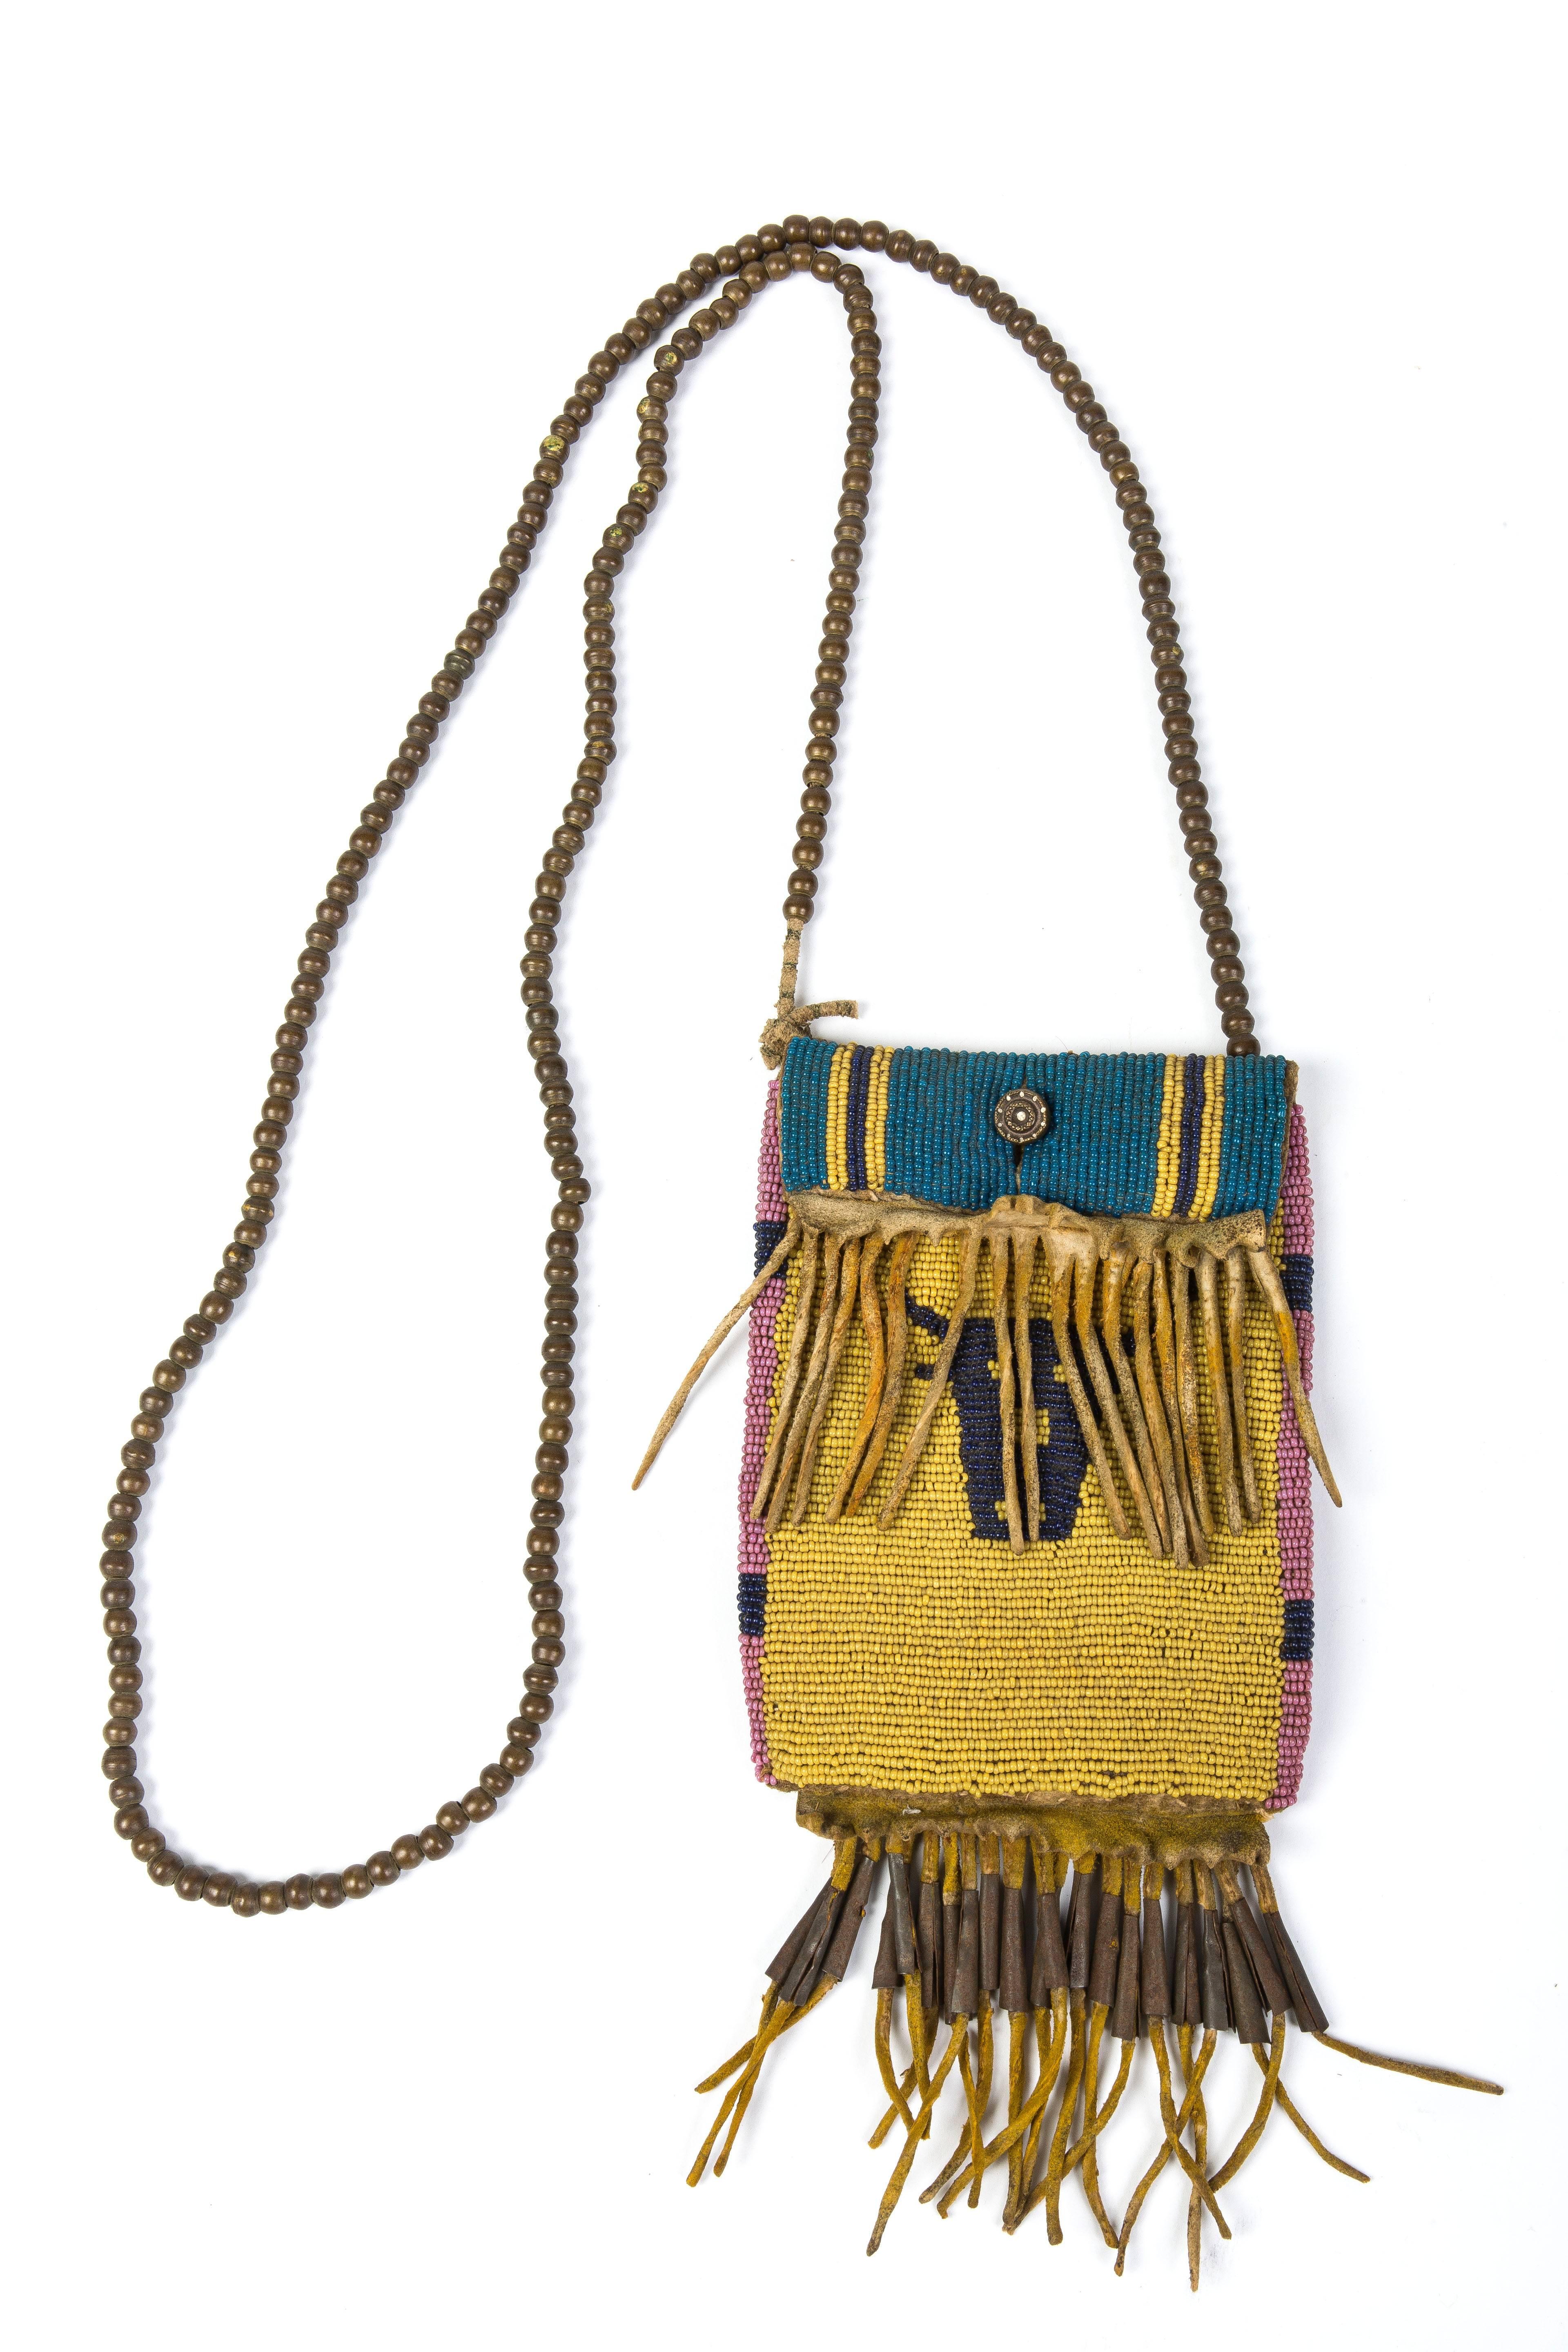 American Indian Art
Small beaded bag bison head pattern
Northern Plains, Canada or the USA, circa 1870
Skin, Murano beads, large beads copper, metal cones, leather thongs, sinew, metal button